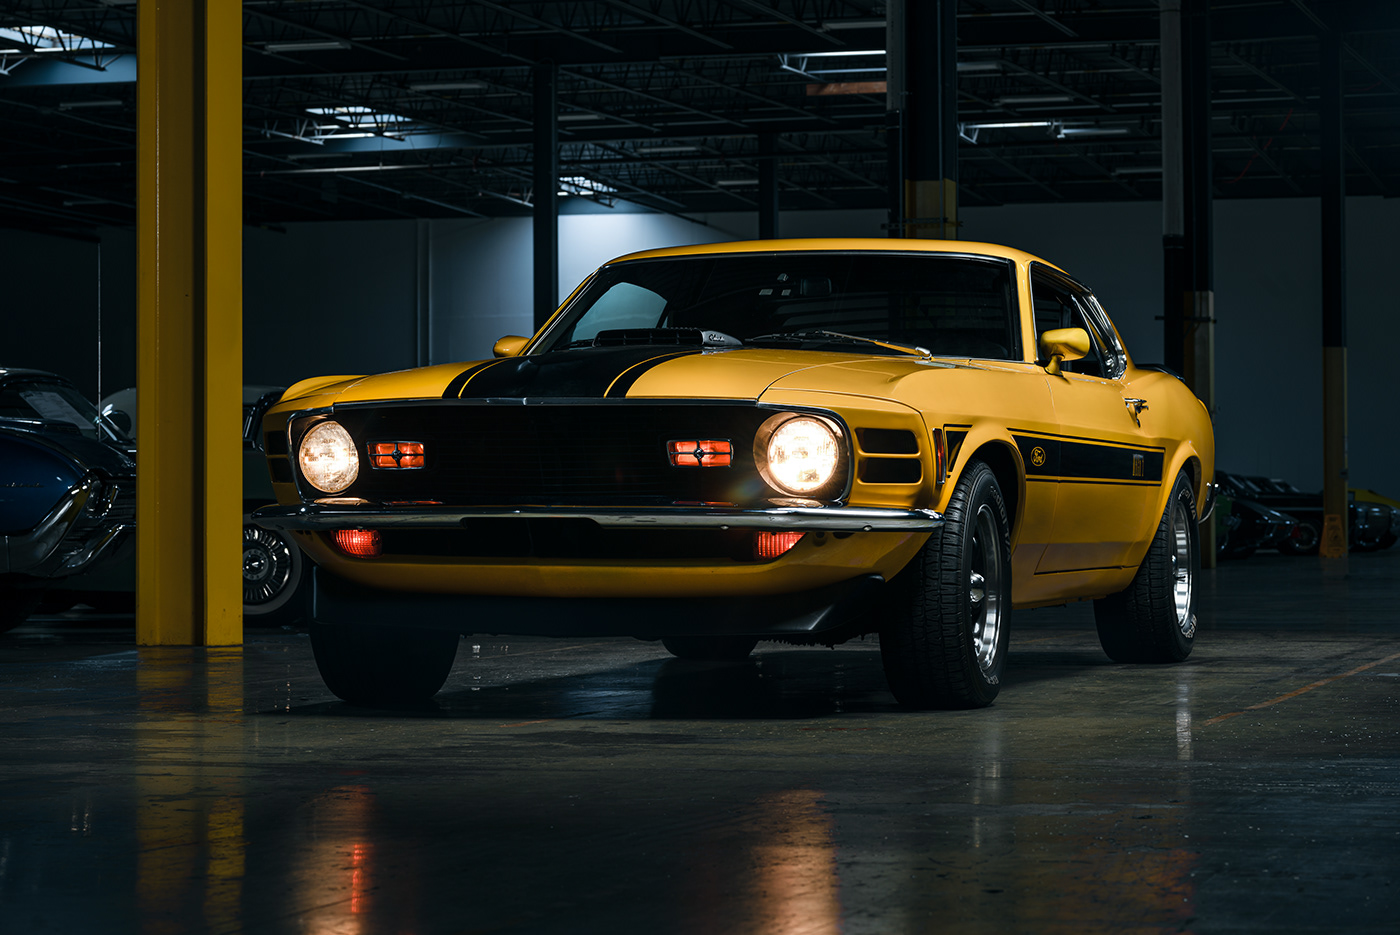 classic car Ford Ford Mustang muscle car Mustang Mustang mach 1